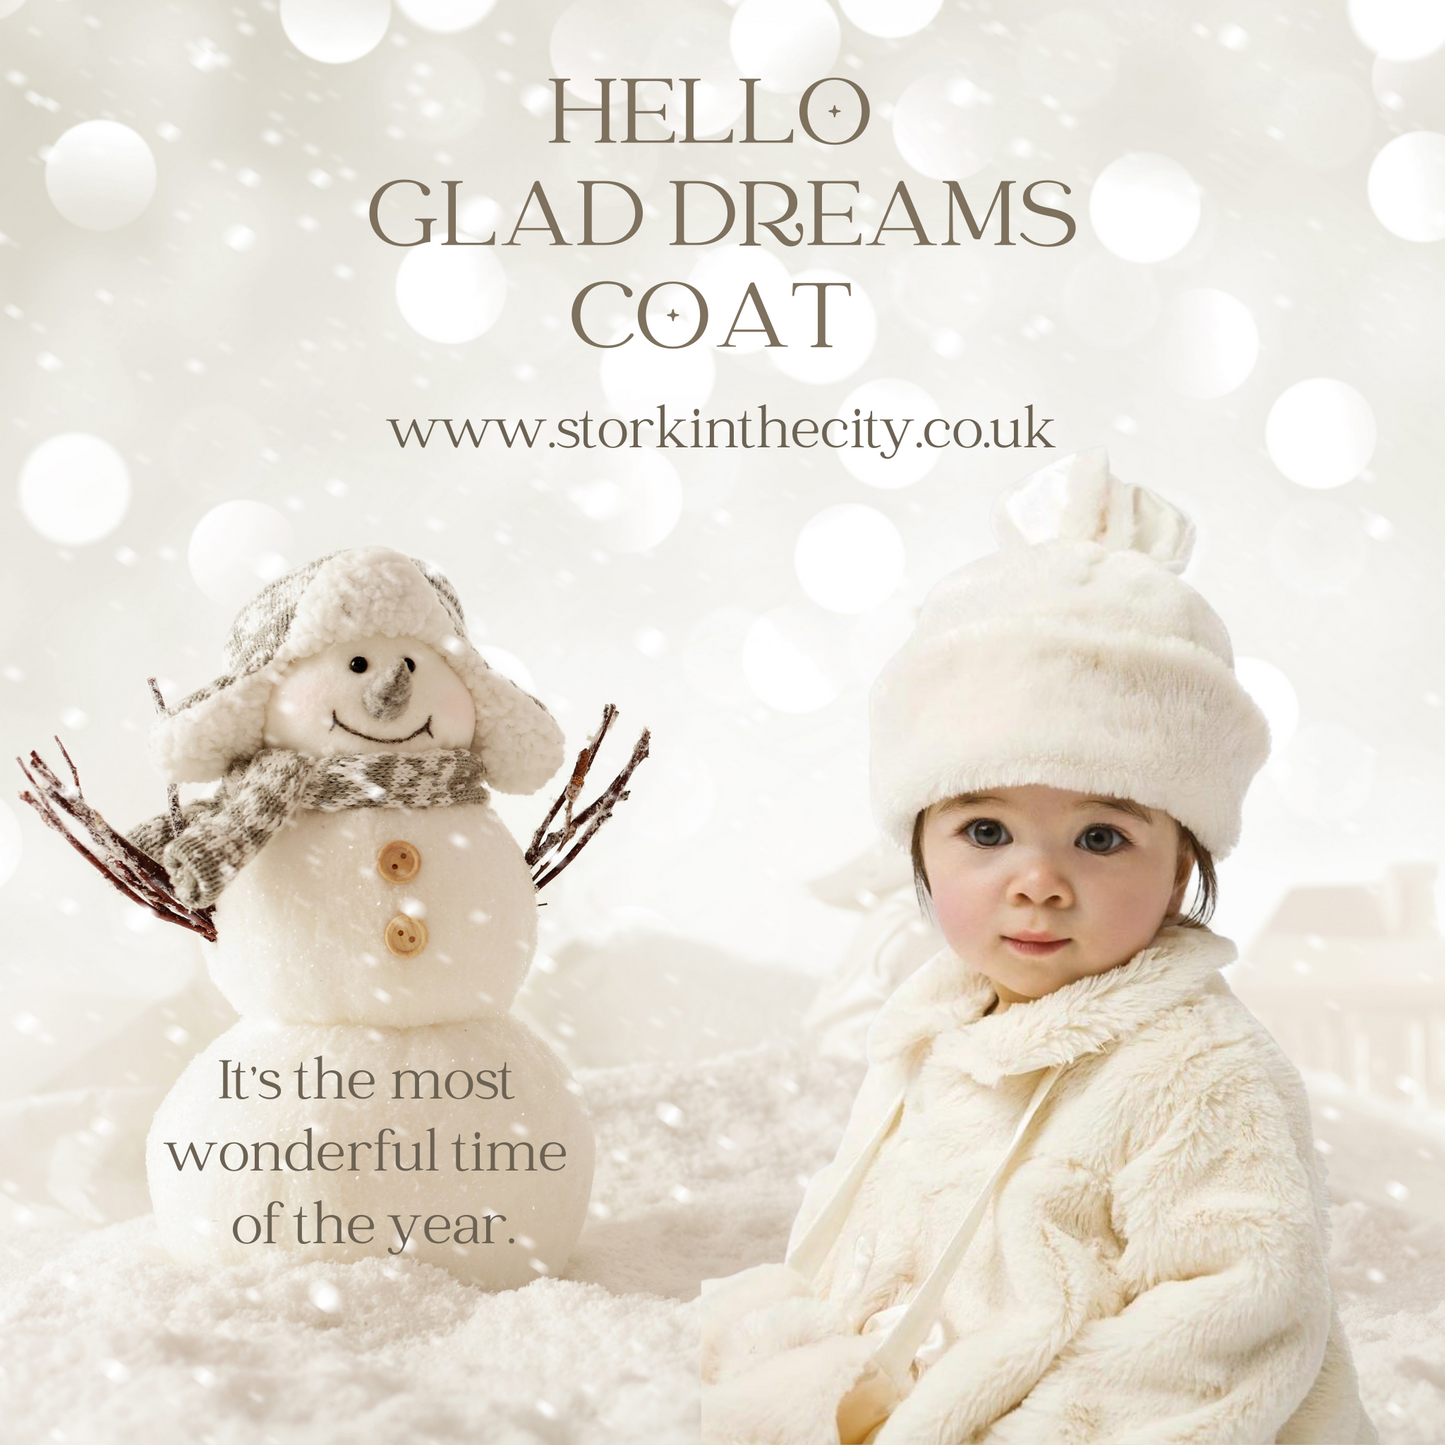 Bunnies by the Bay Glad Dreams Coat and Doll Heirloom Gift Bundle